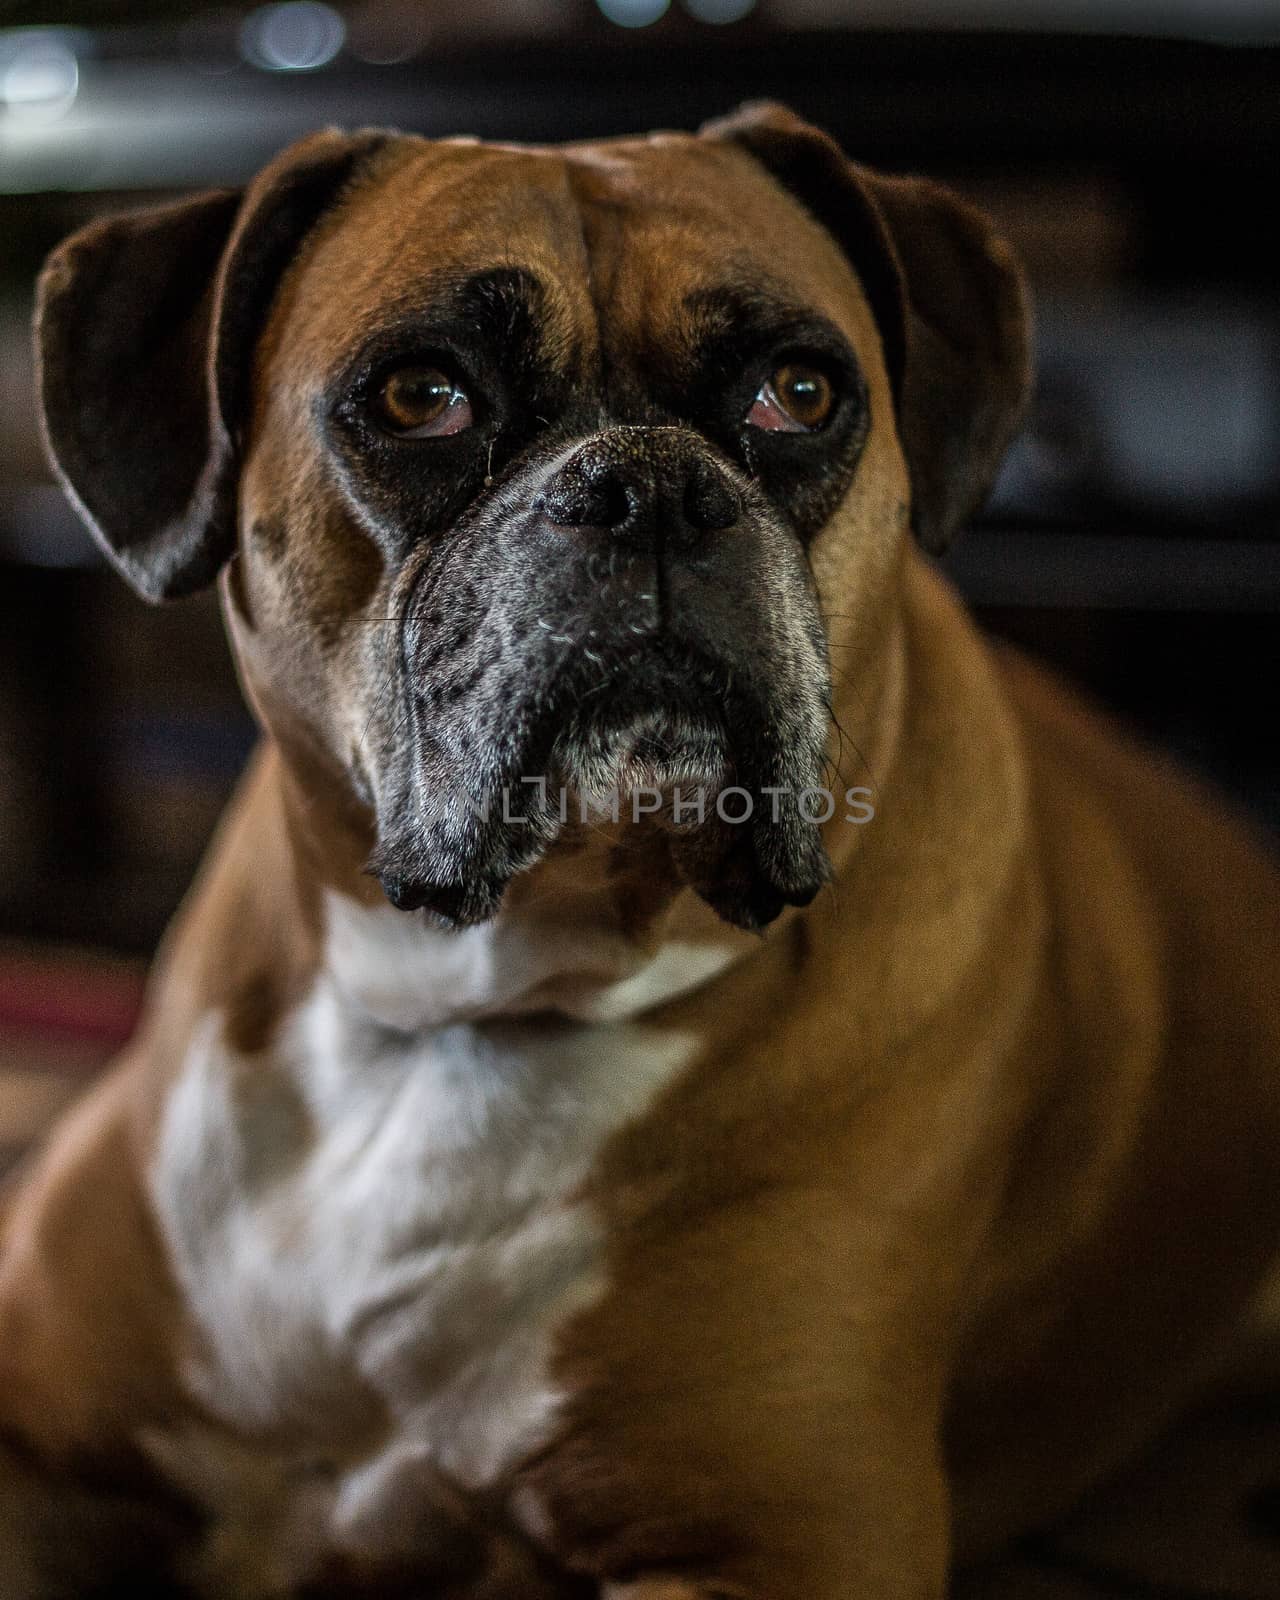 Female boxer with sad and expressive eyes.